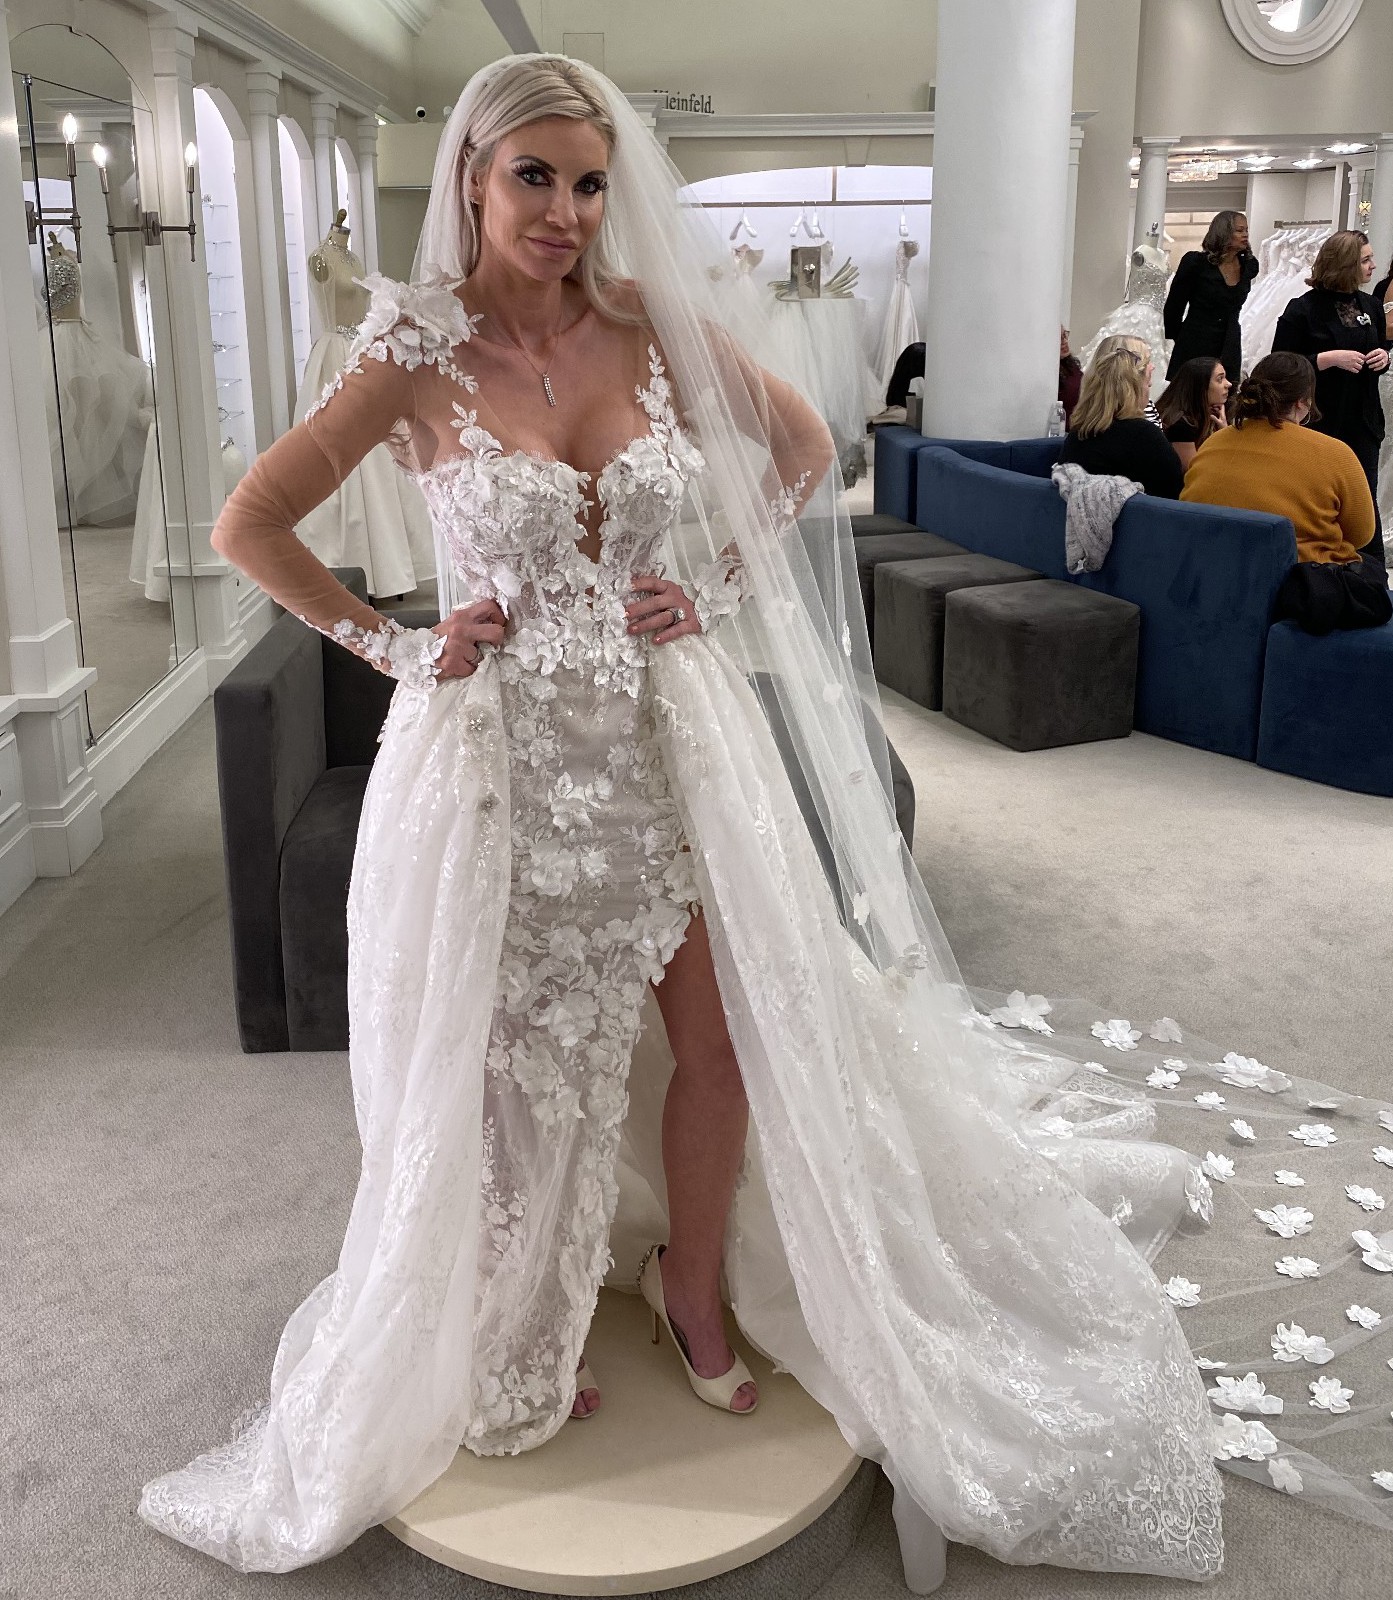 Aggregate 124+ panina wedding gowns